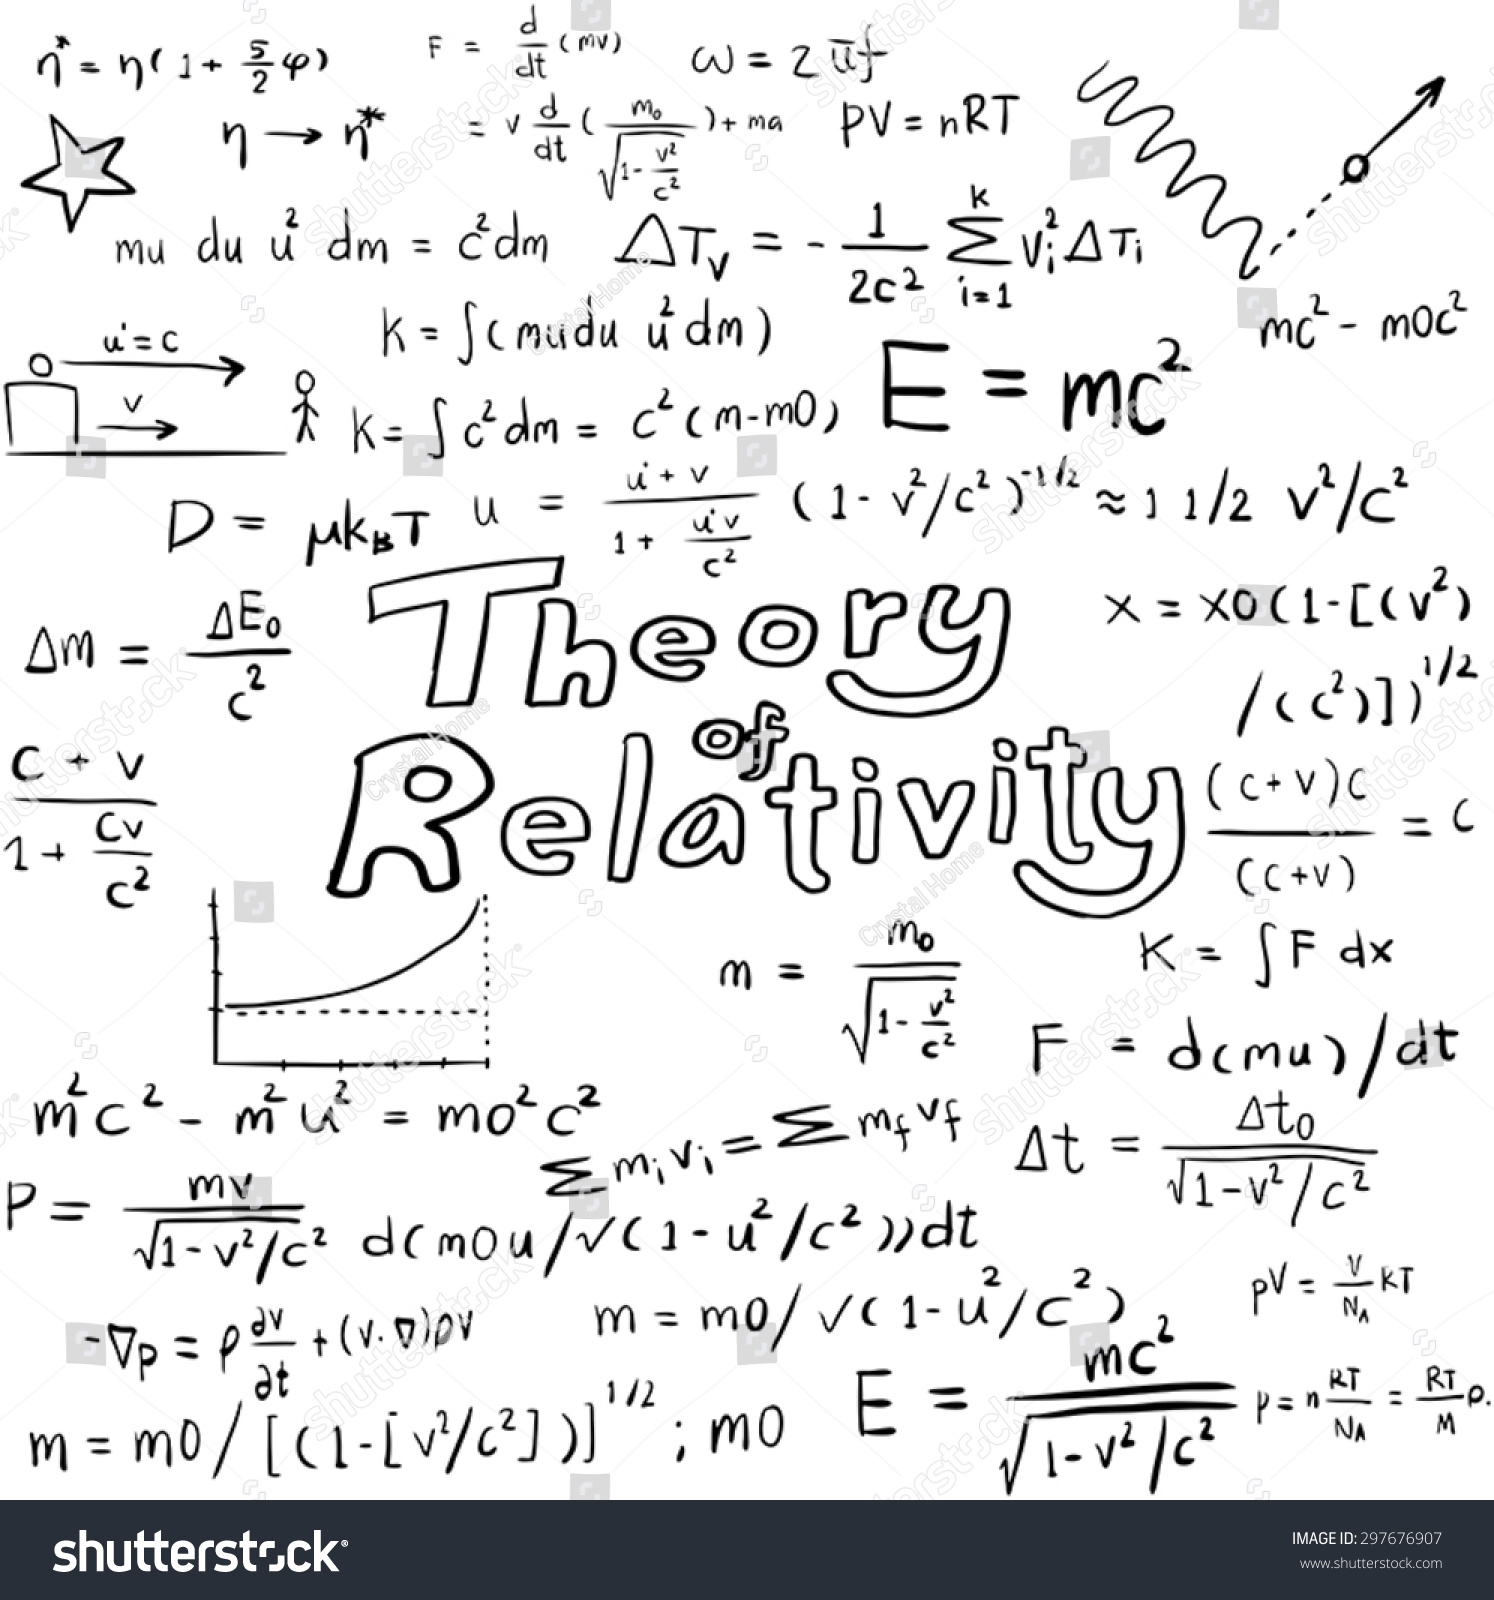 Theory of relativity research paper